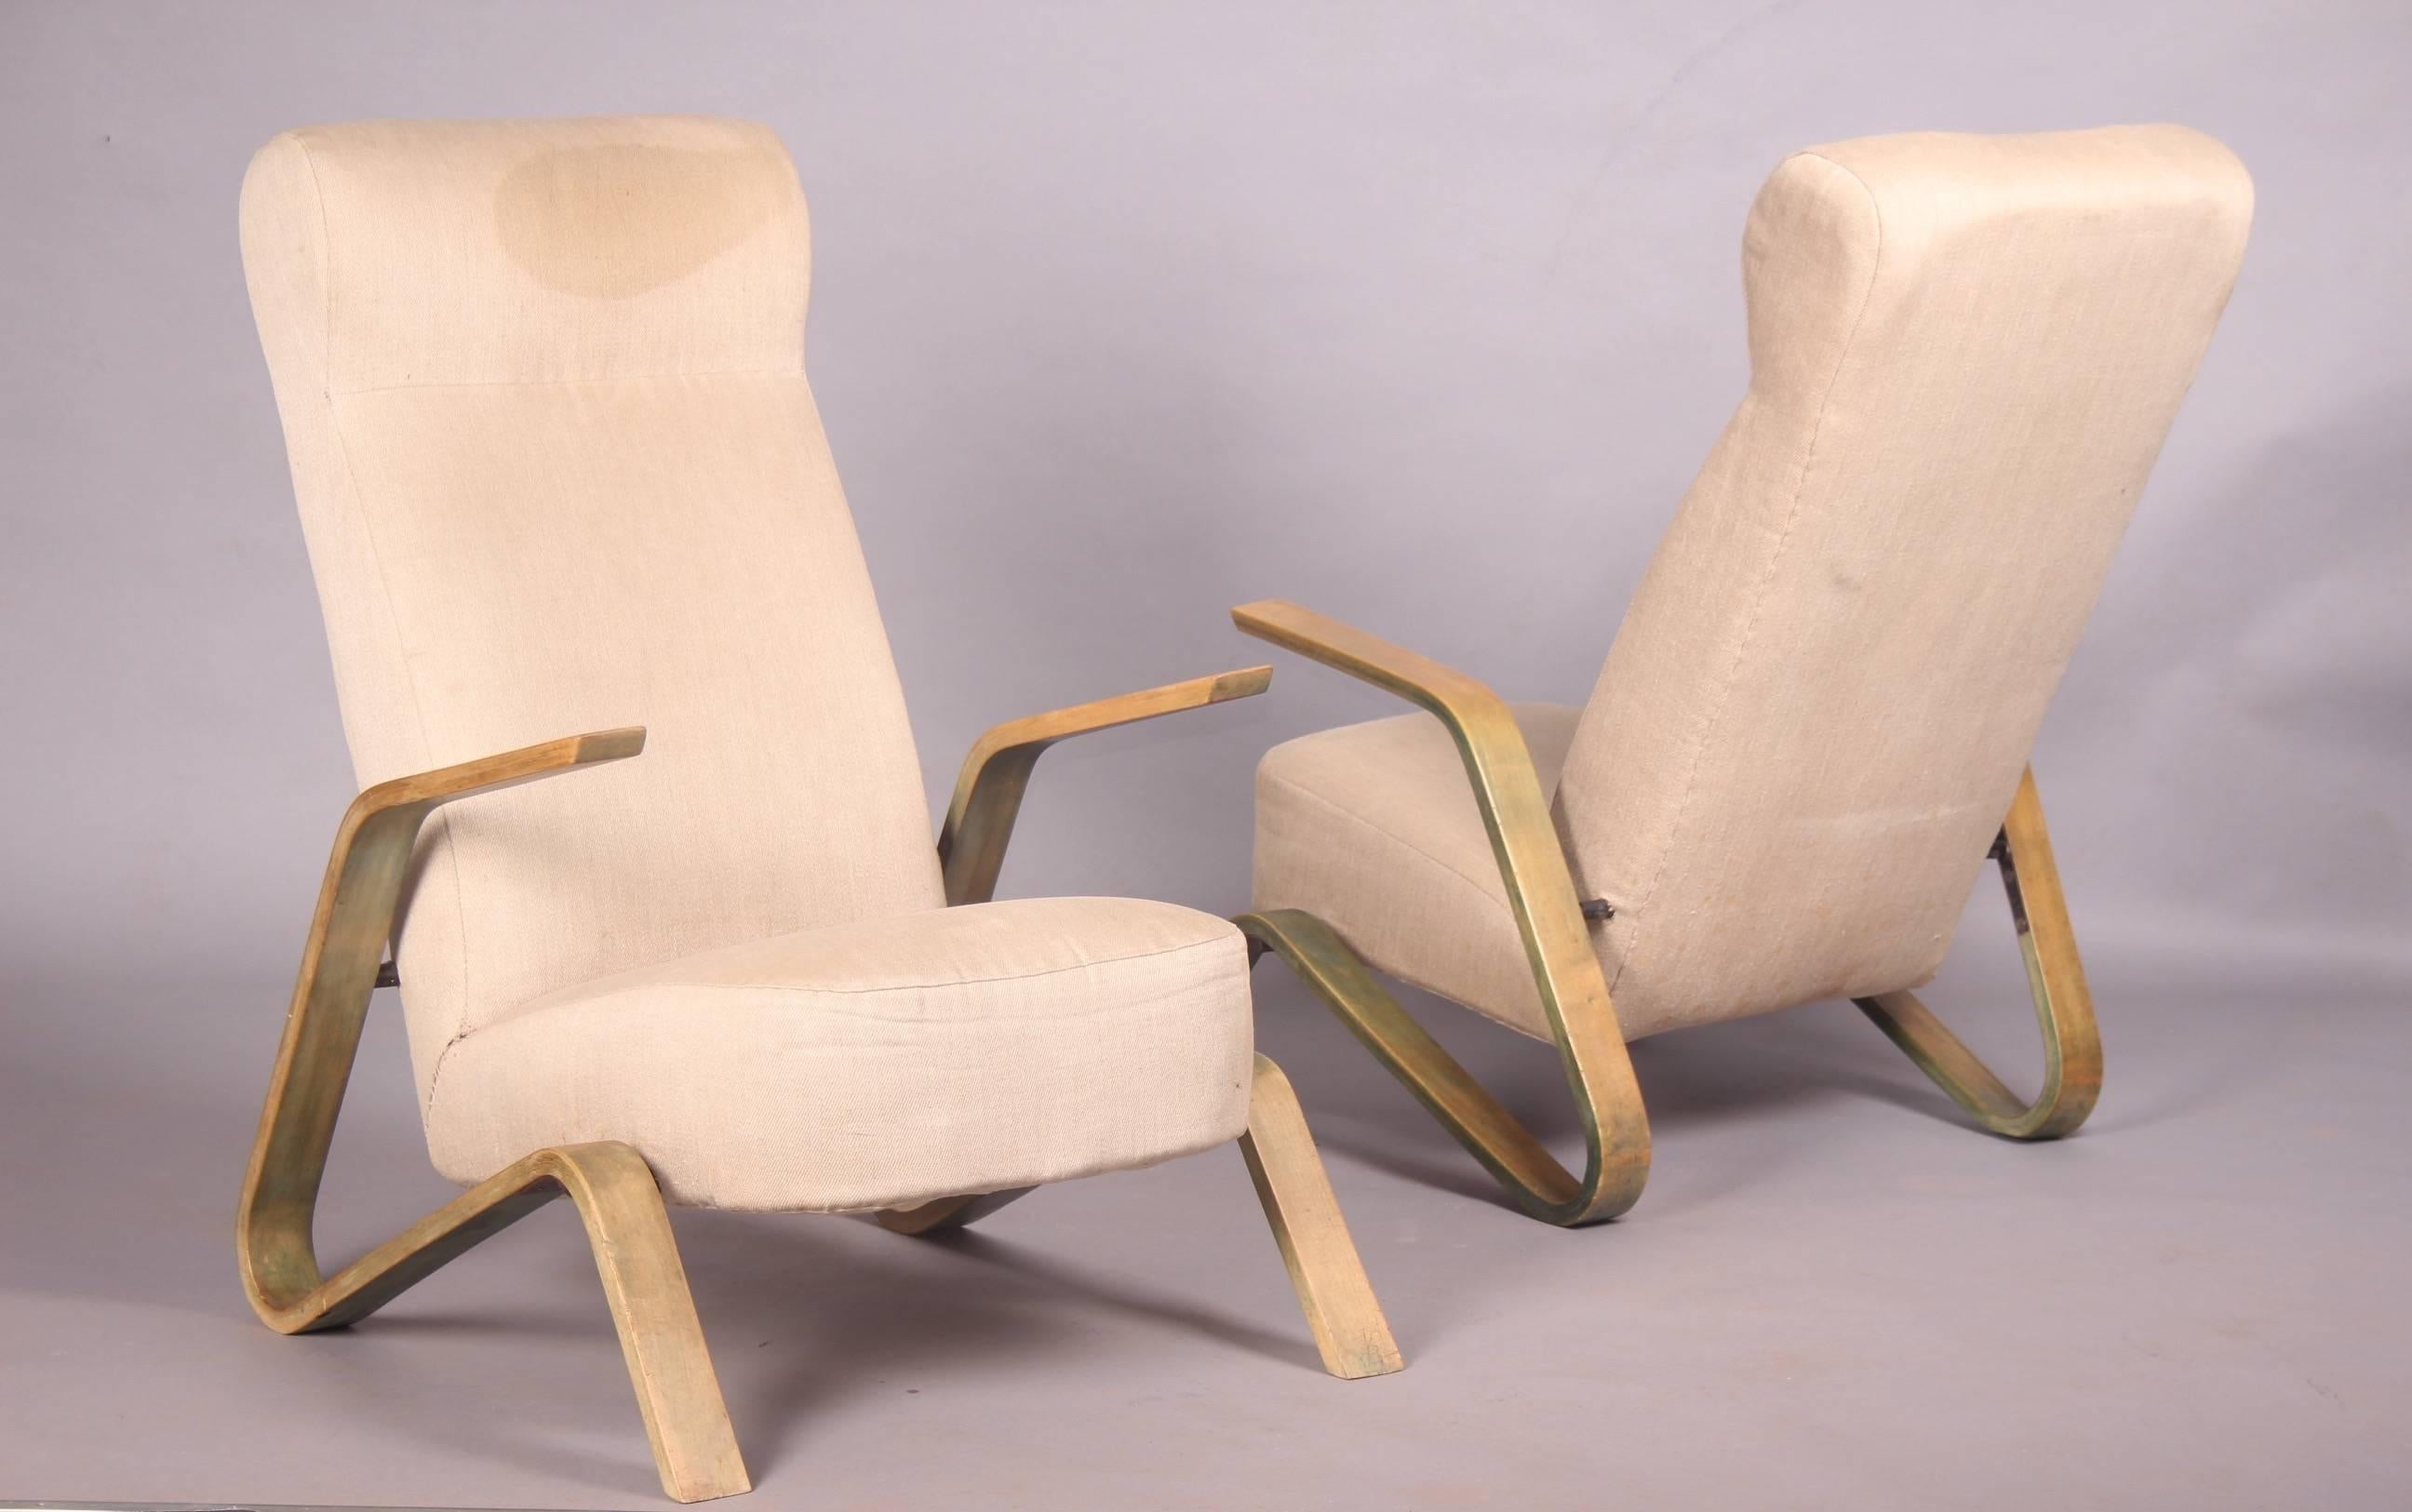 Pair of Grasshopper chairs for the Zurich airport, original fabric but must be changed and one foot is twisted.